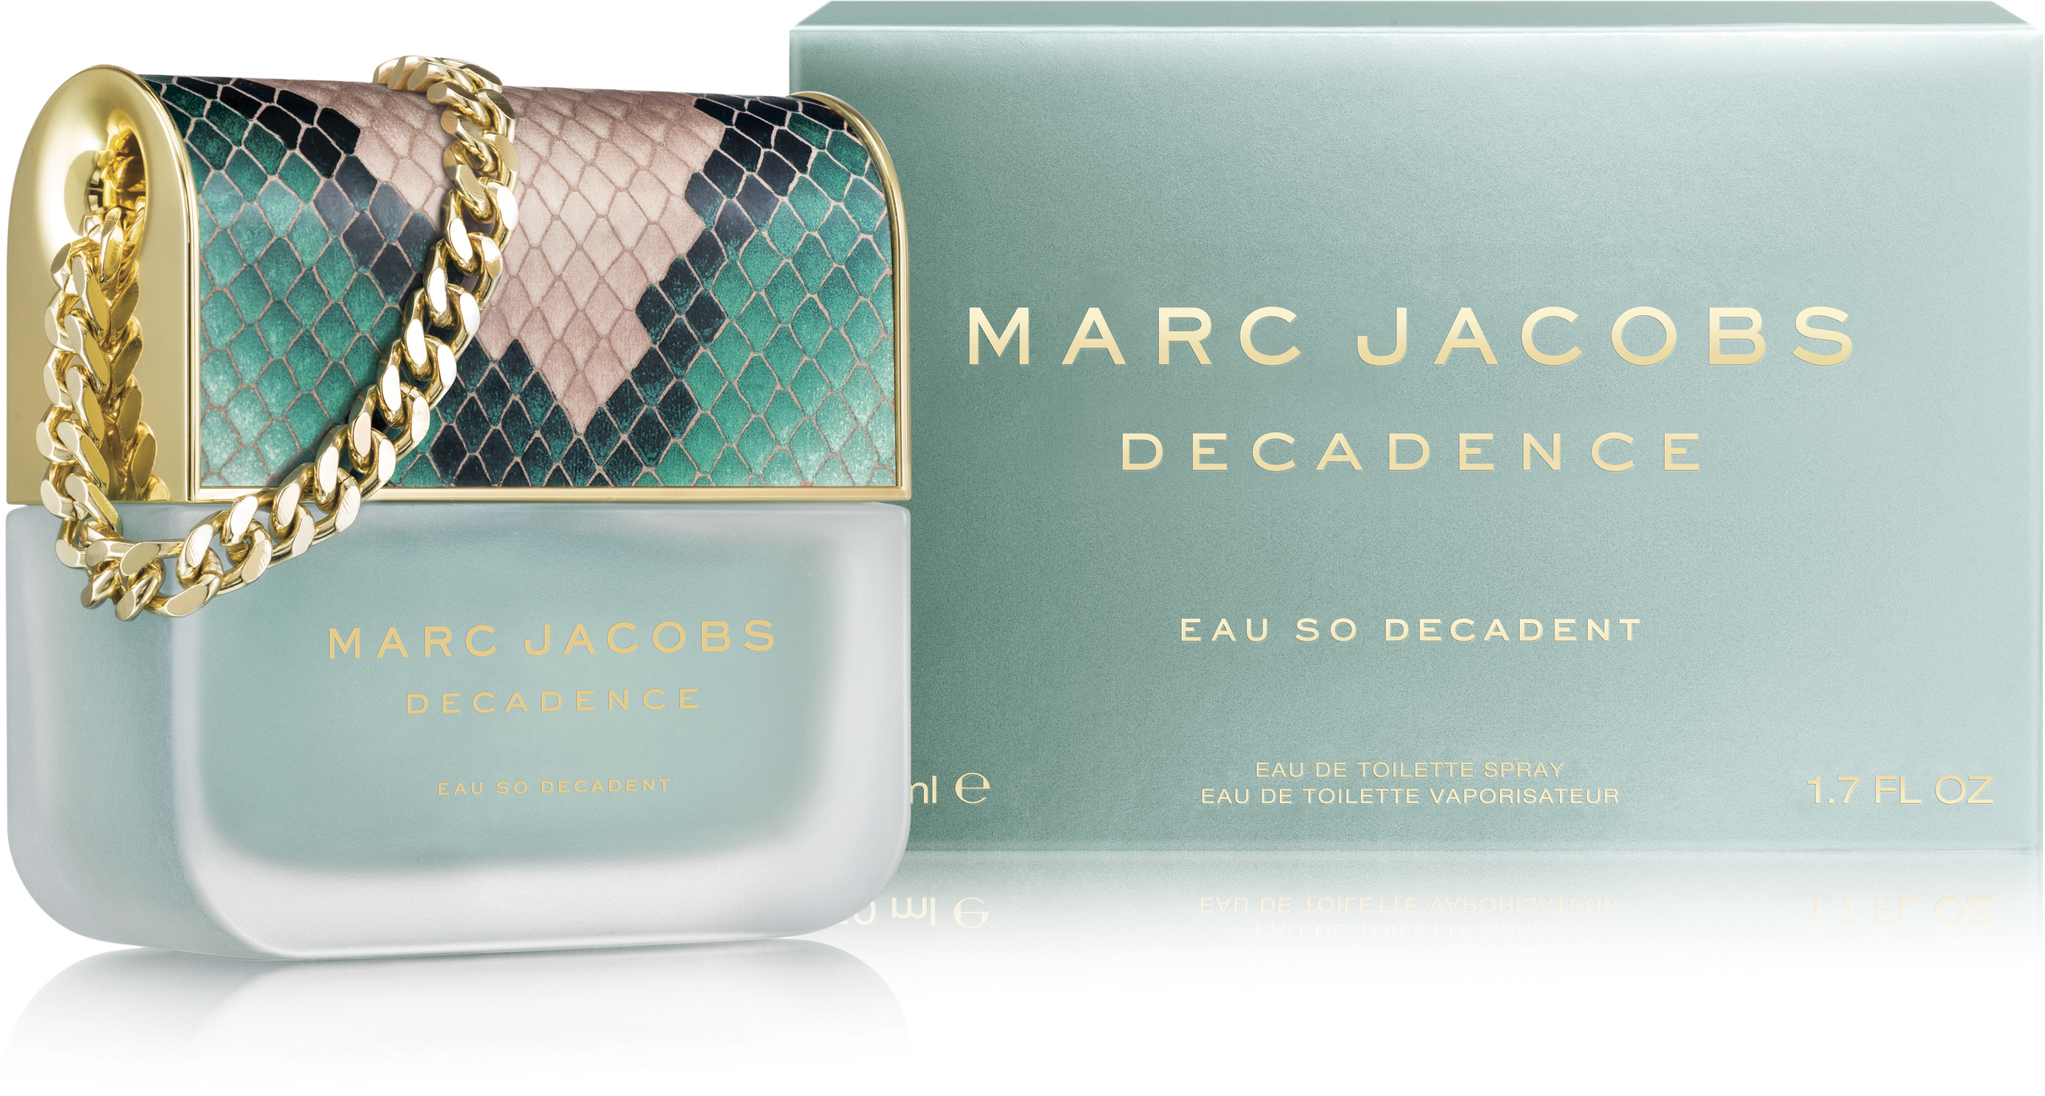 peper bijlage Aanbod Marc Jacobs Decadence Eau so Decadent EdT 50ml in duty-free at airport  Domodedovo